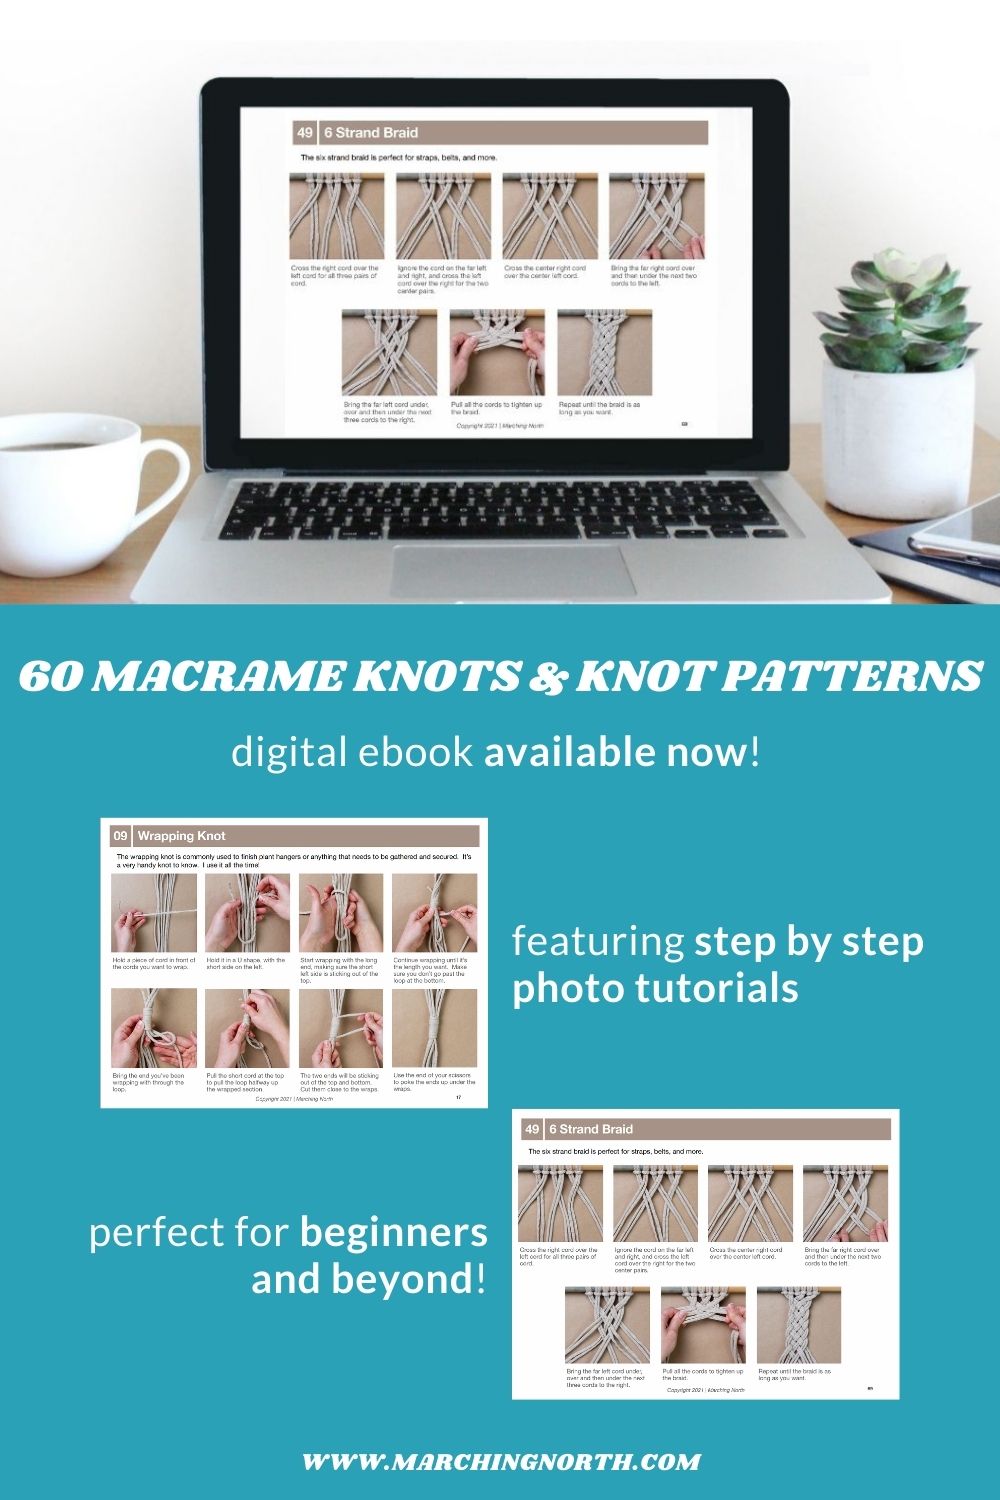 60 macrame knots and knot patterns ebook is available in my shop!